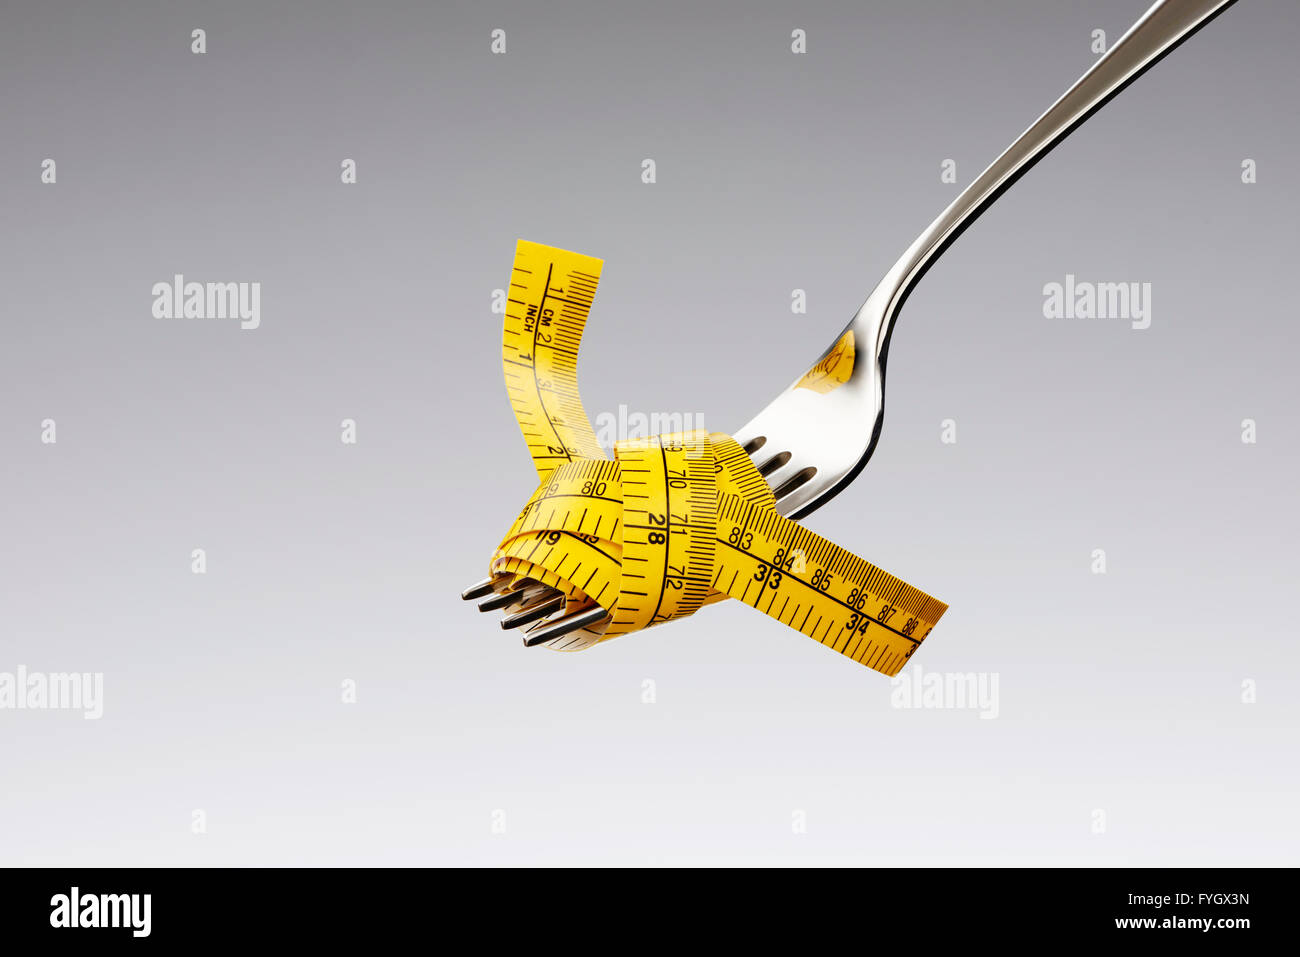 Fork with Tape Measure Dieting Concept Obesity Stock Photo